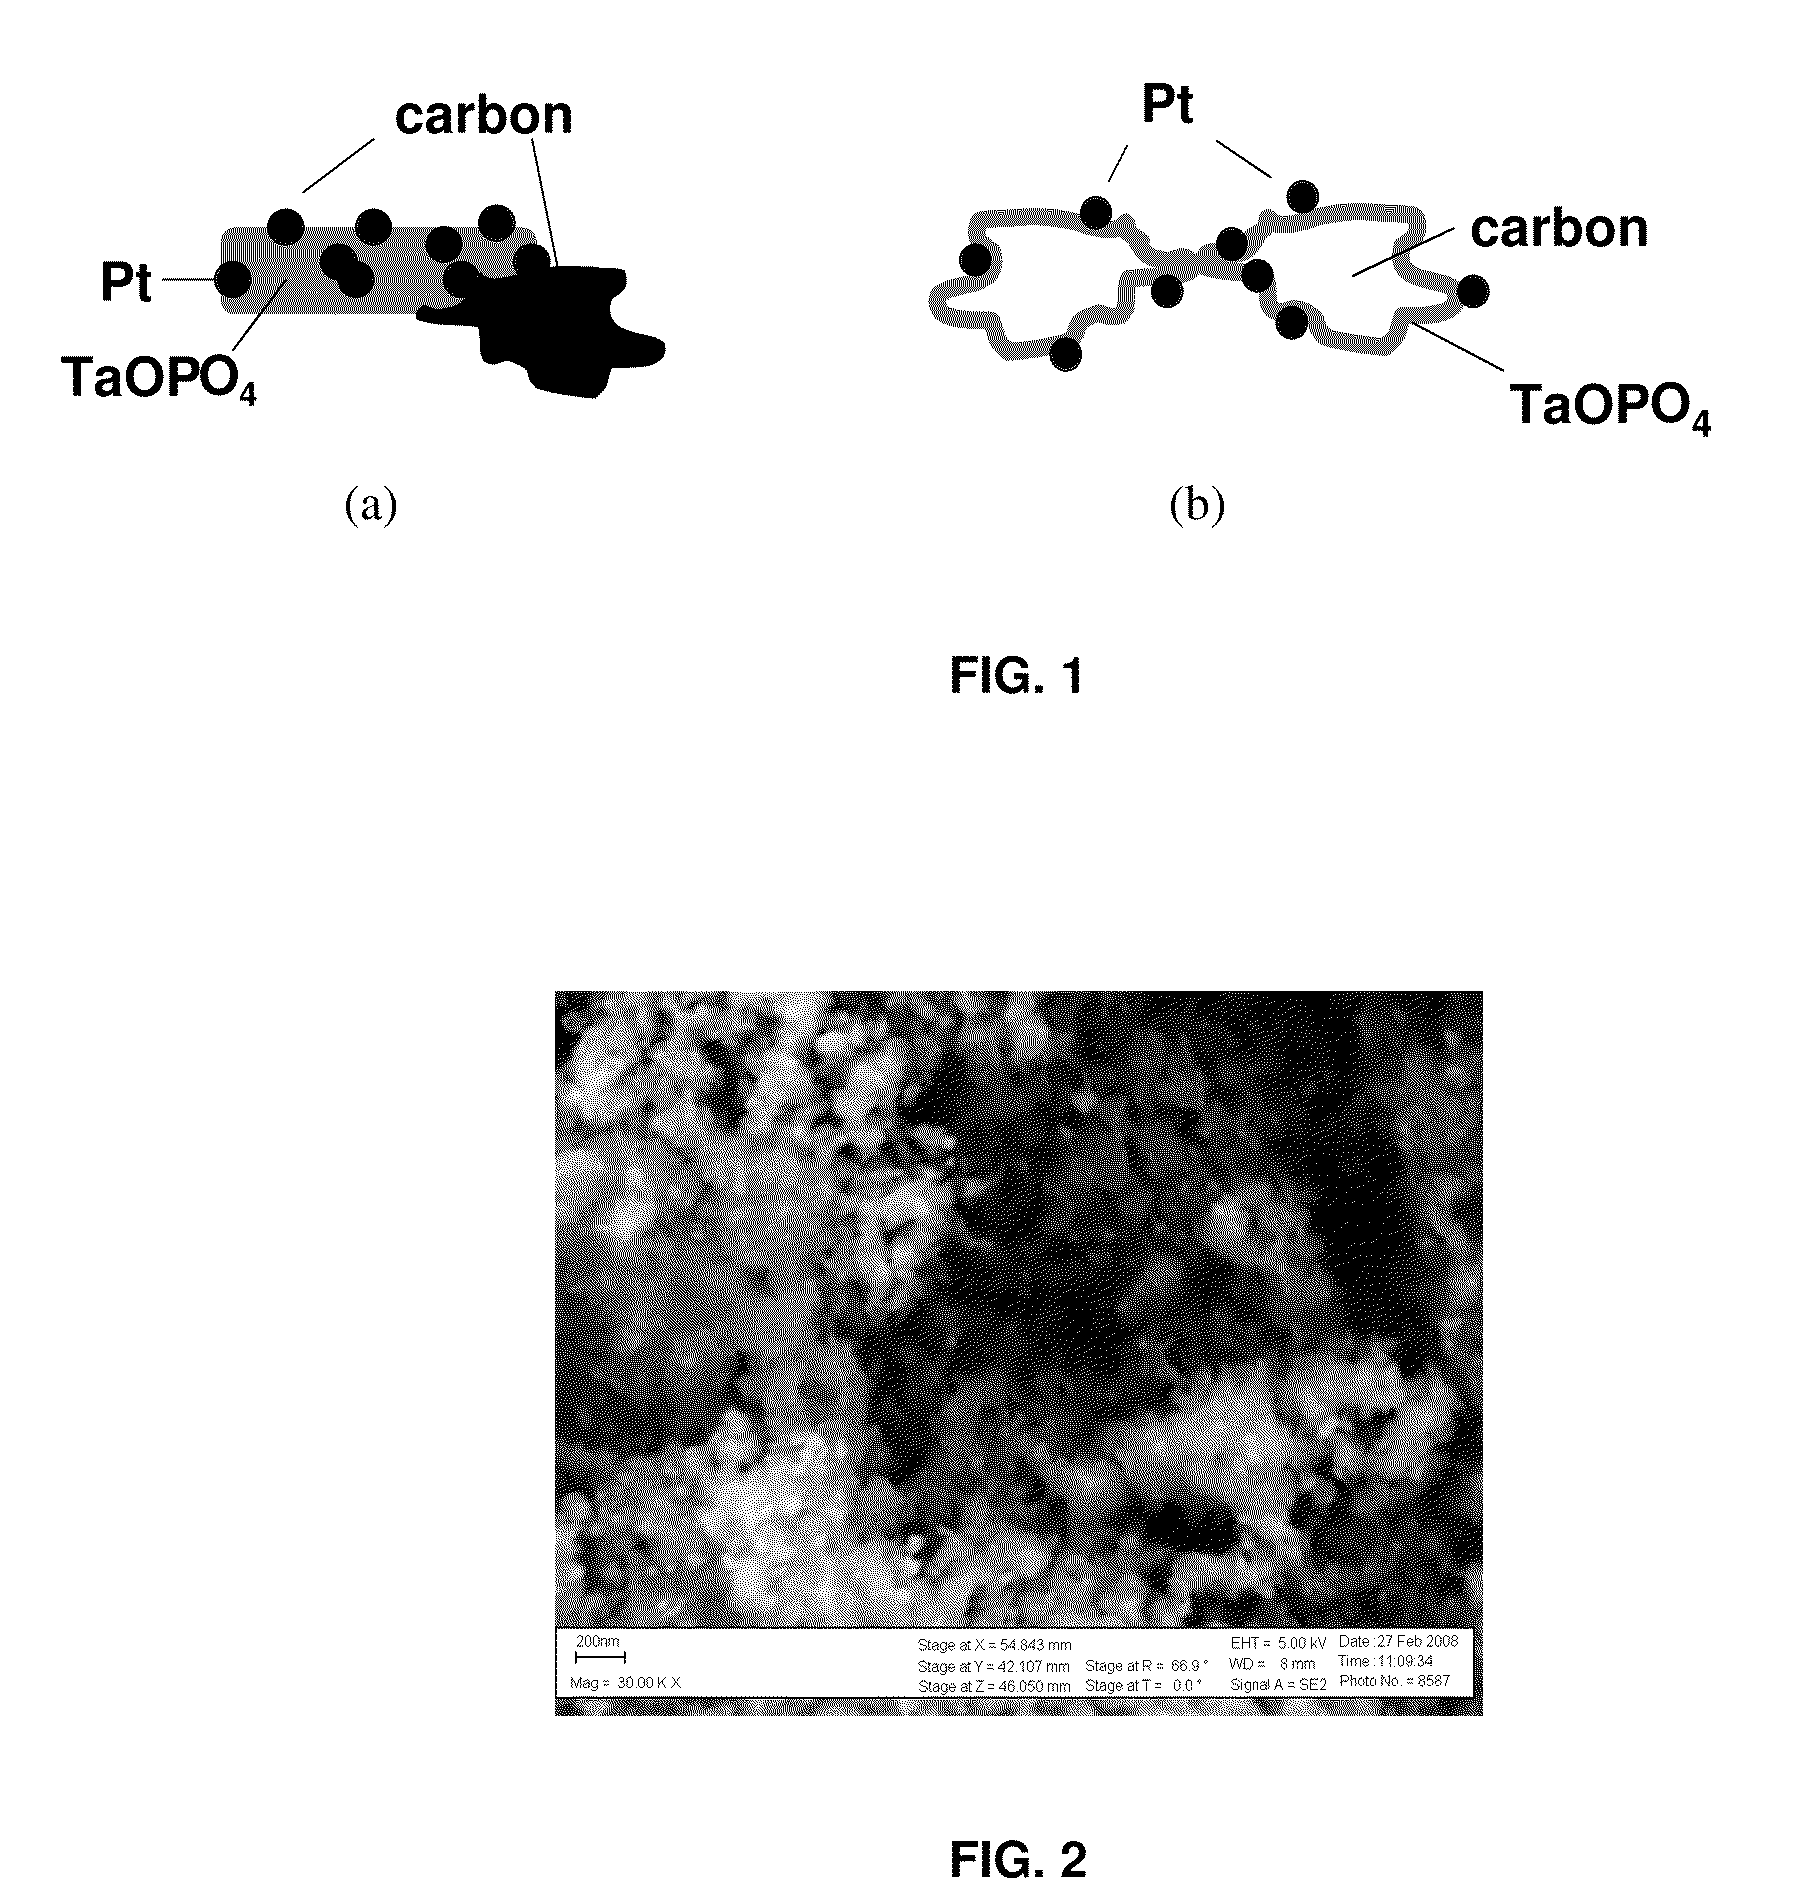 Nanocomposite catalyst materials comprising conductive support (carbon), transition metal compound, and metal nanoparticles